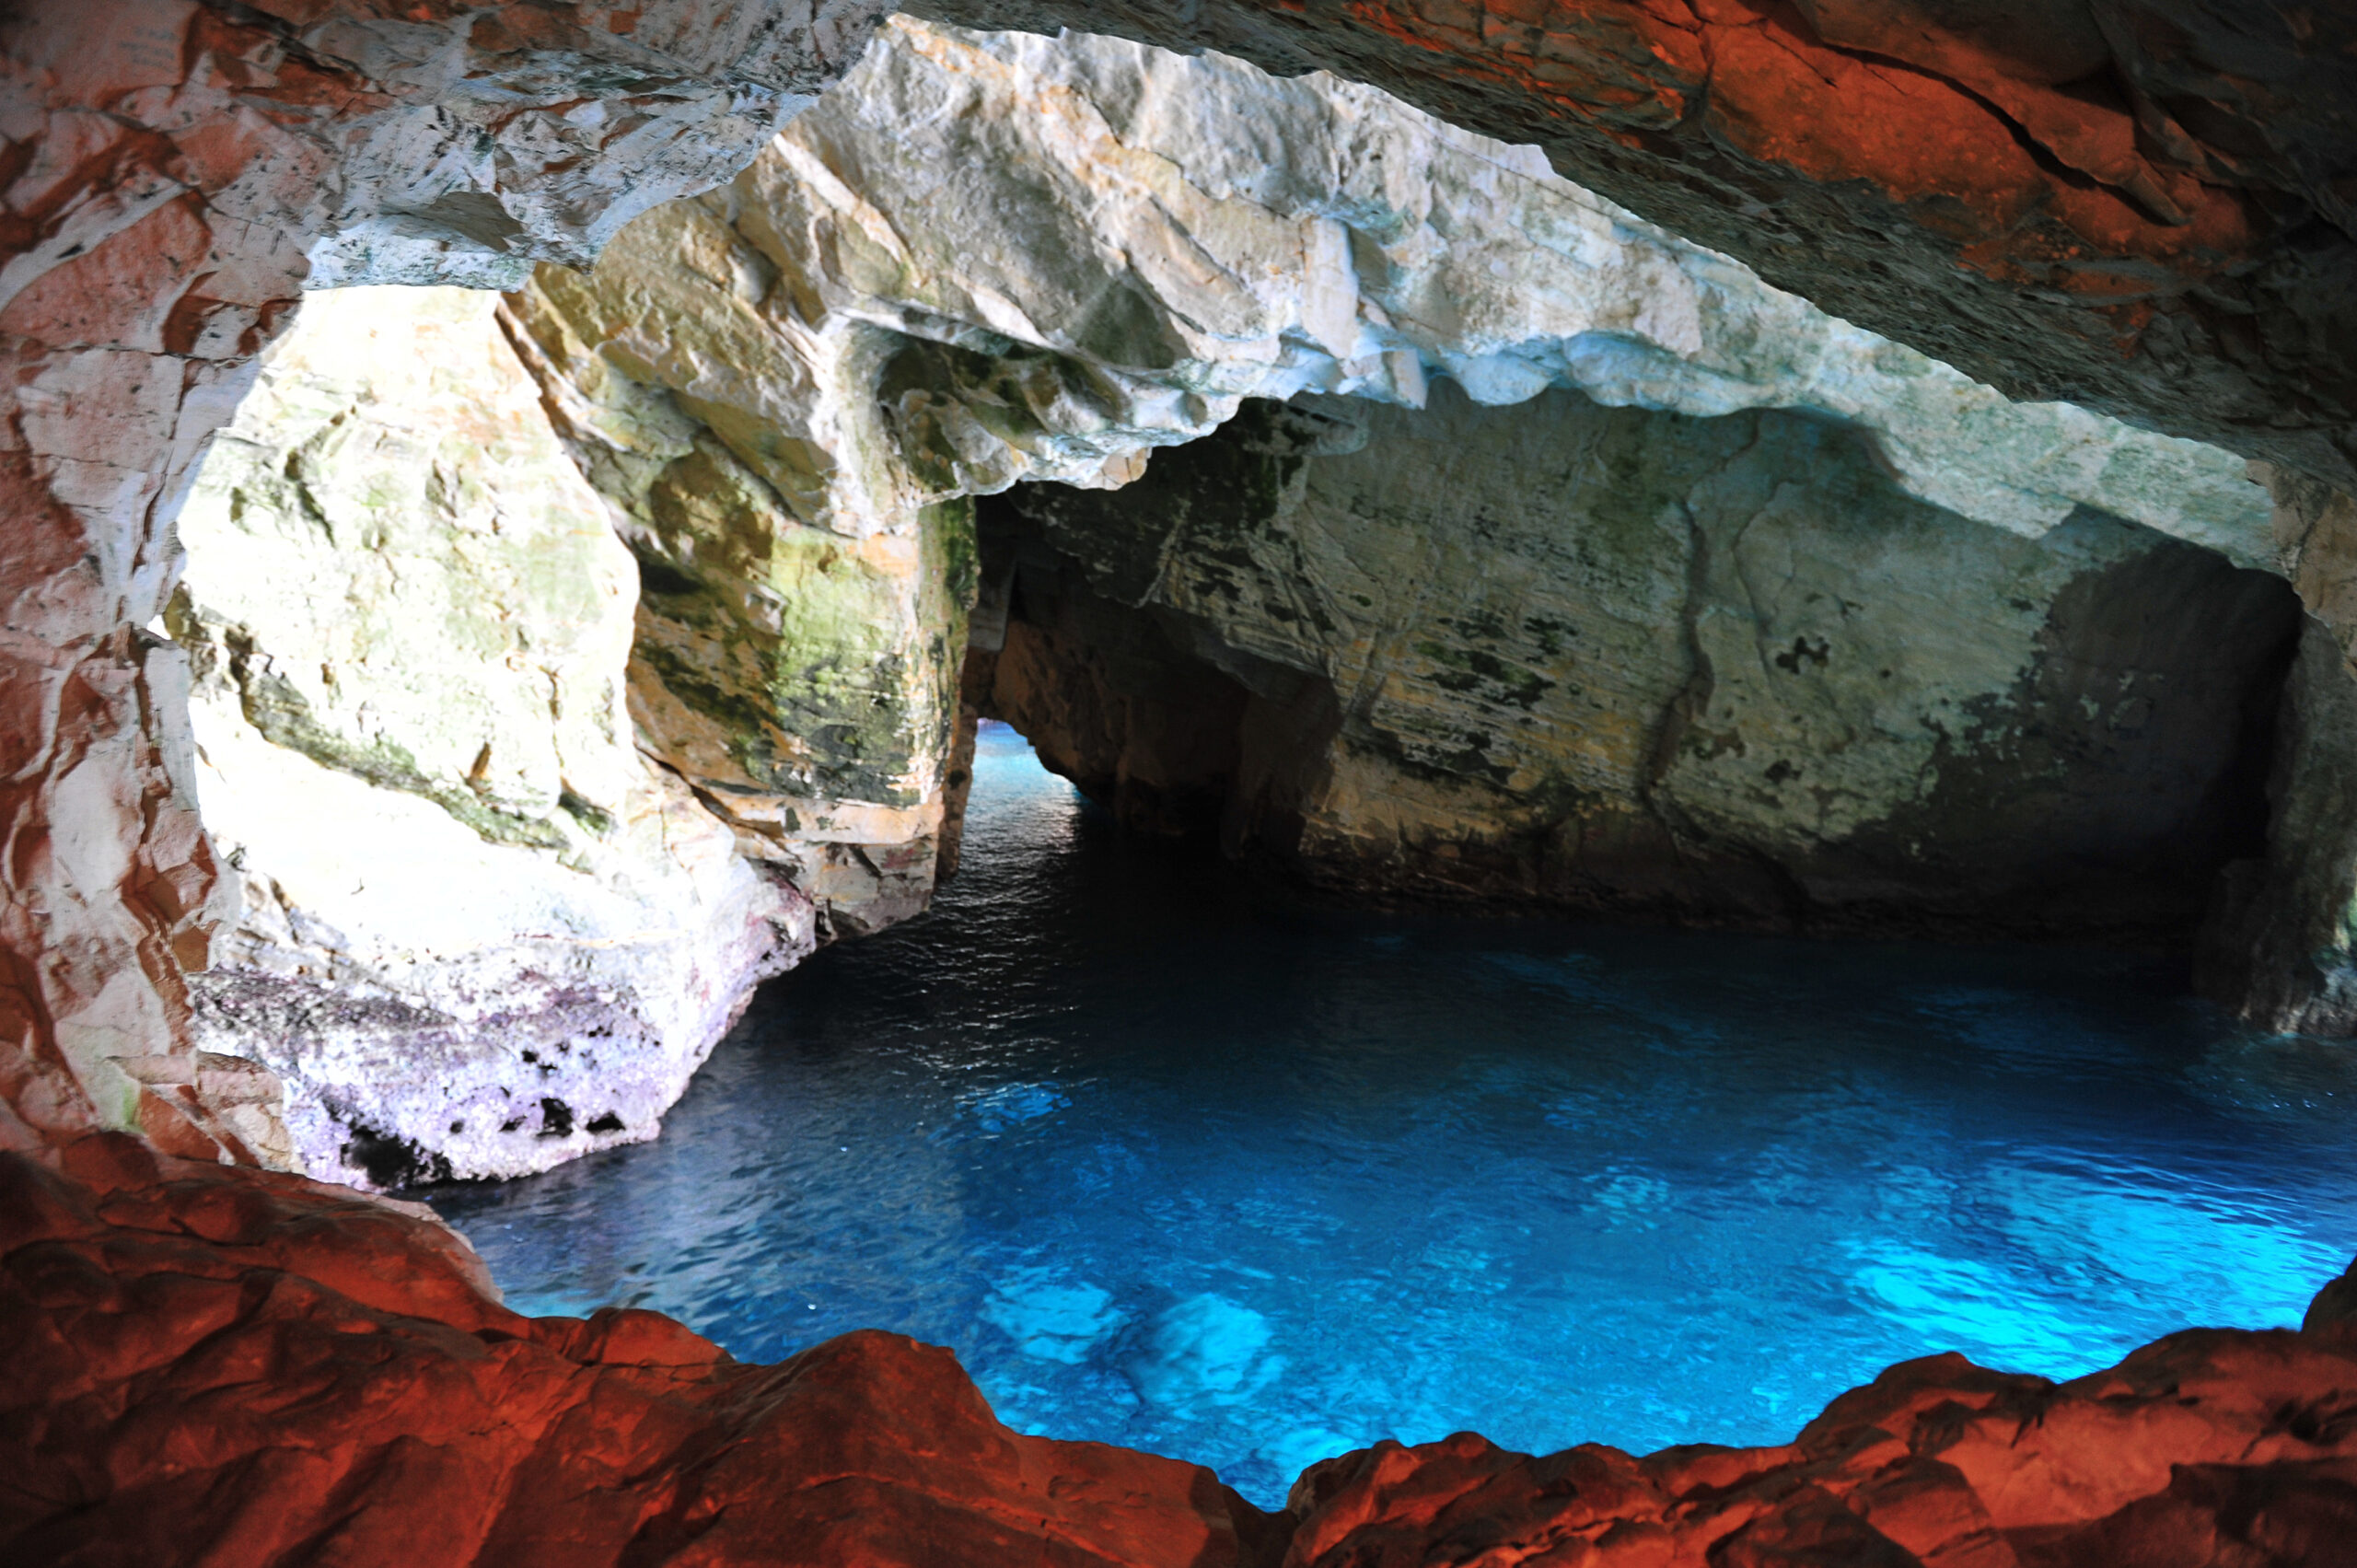 A grotto cave pool, featuring a natural or man-made cave structure integrated into the pool area